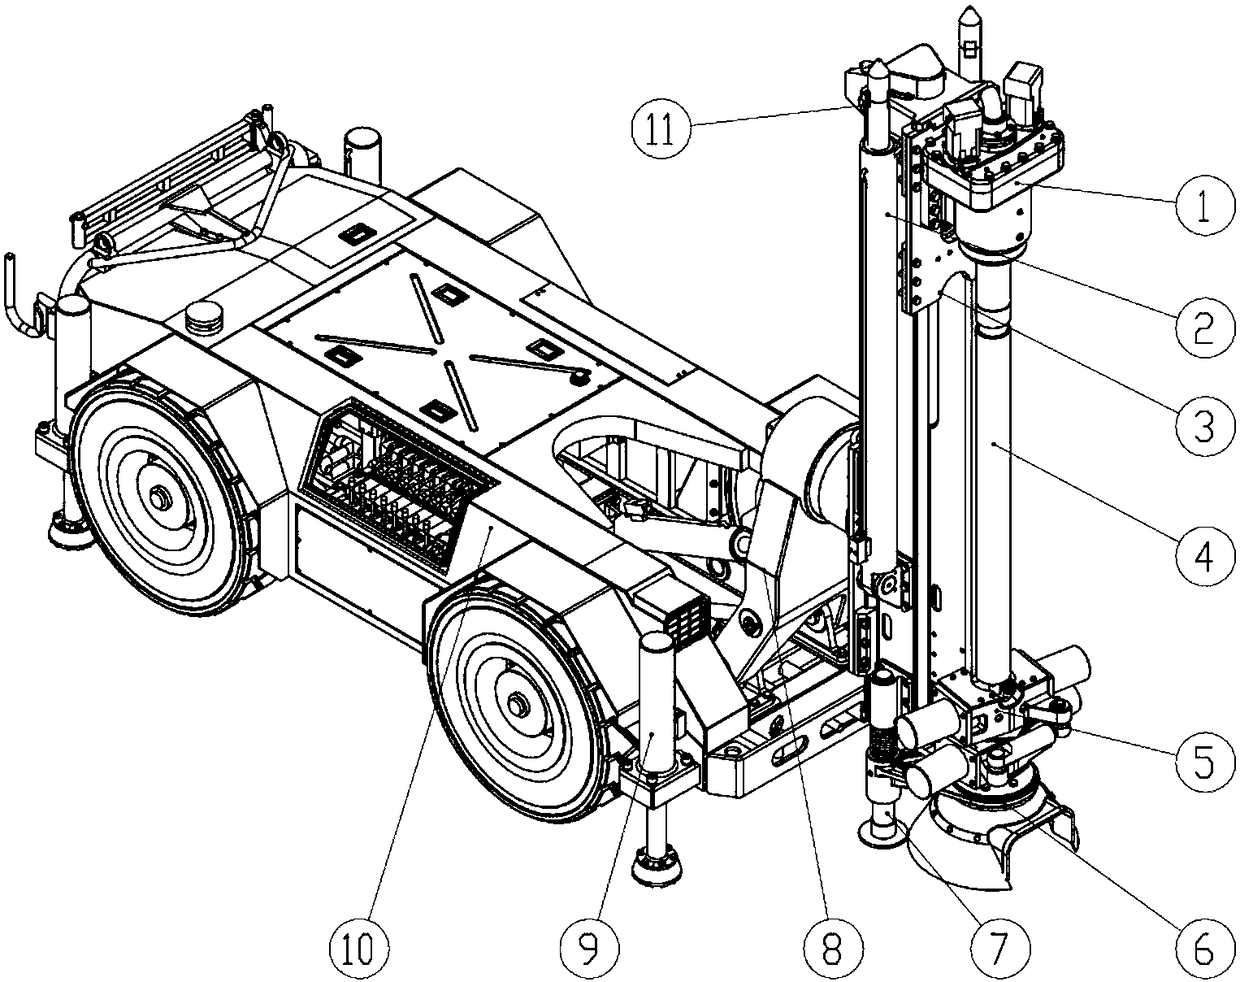 A Modular Underground Down-the-hole Drilling Rig Adaptable to Low Environment